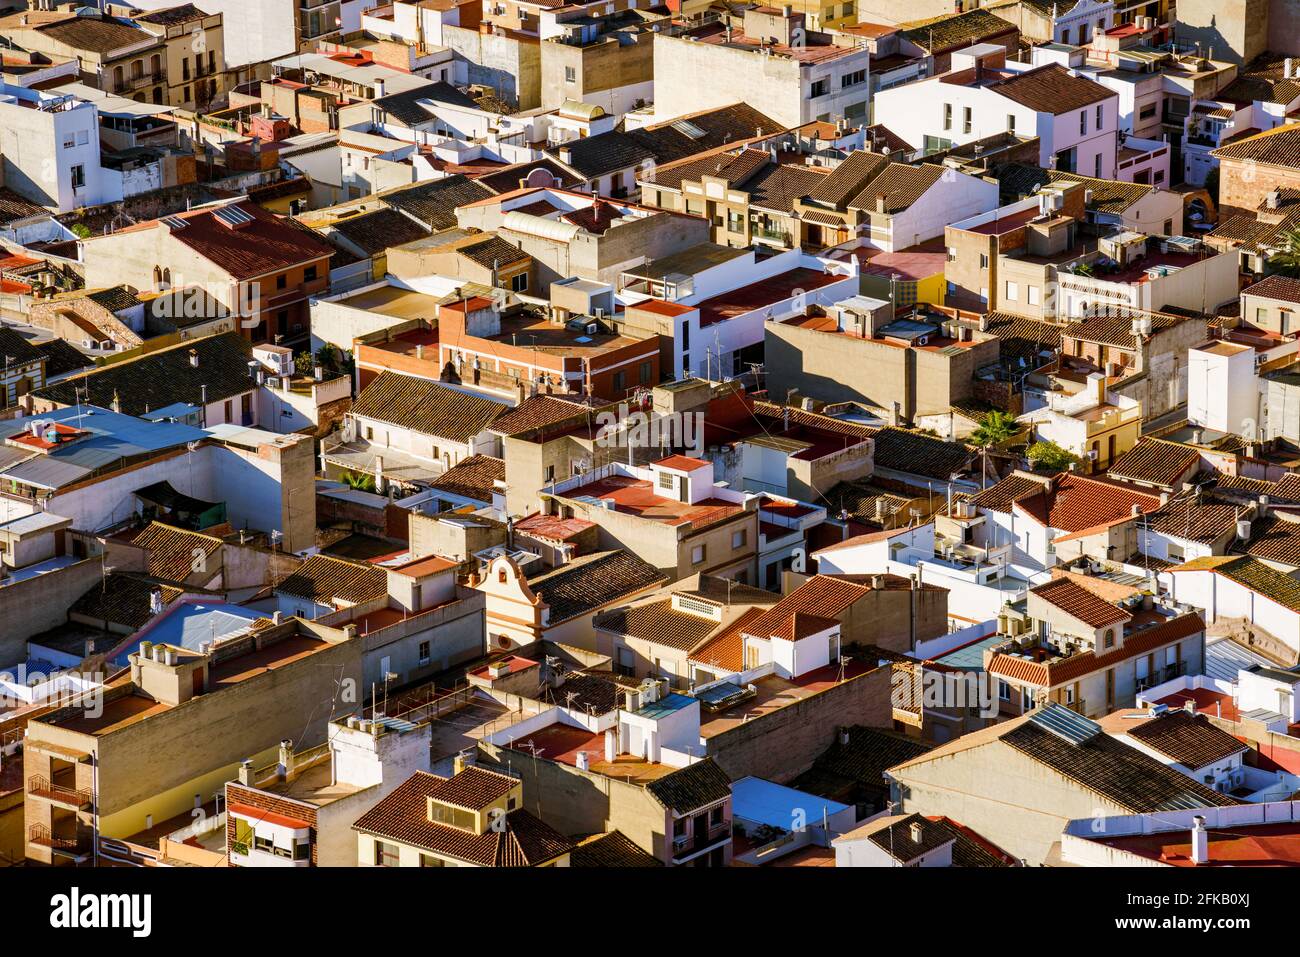 Chaotic densely populated cityscape. Roof top view. Almenara, Castellon province, Spain Stock Photo